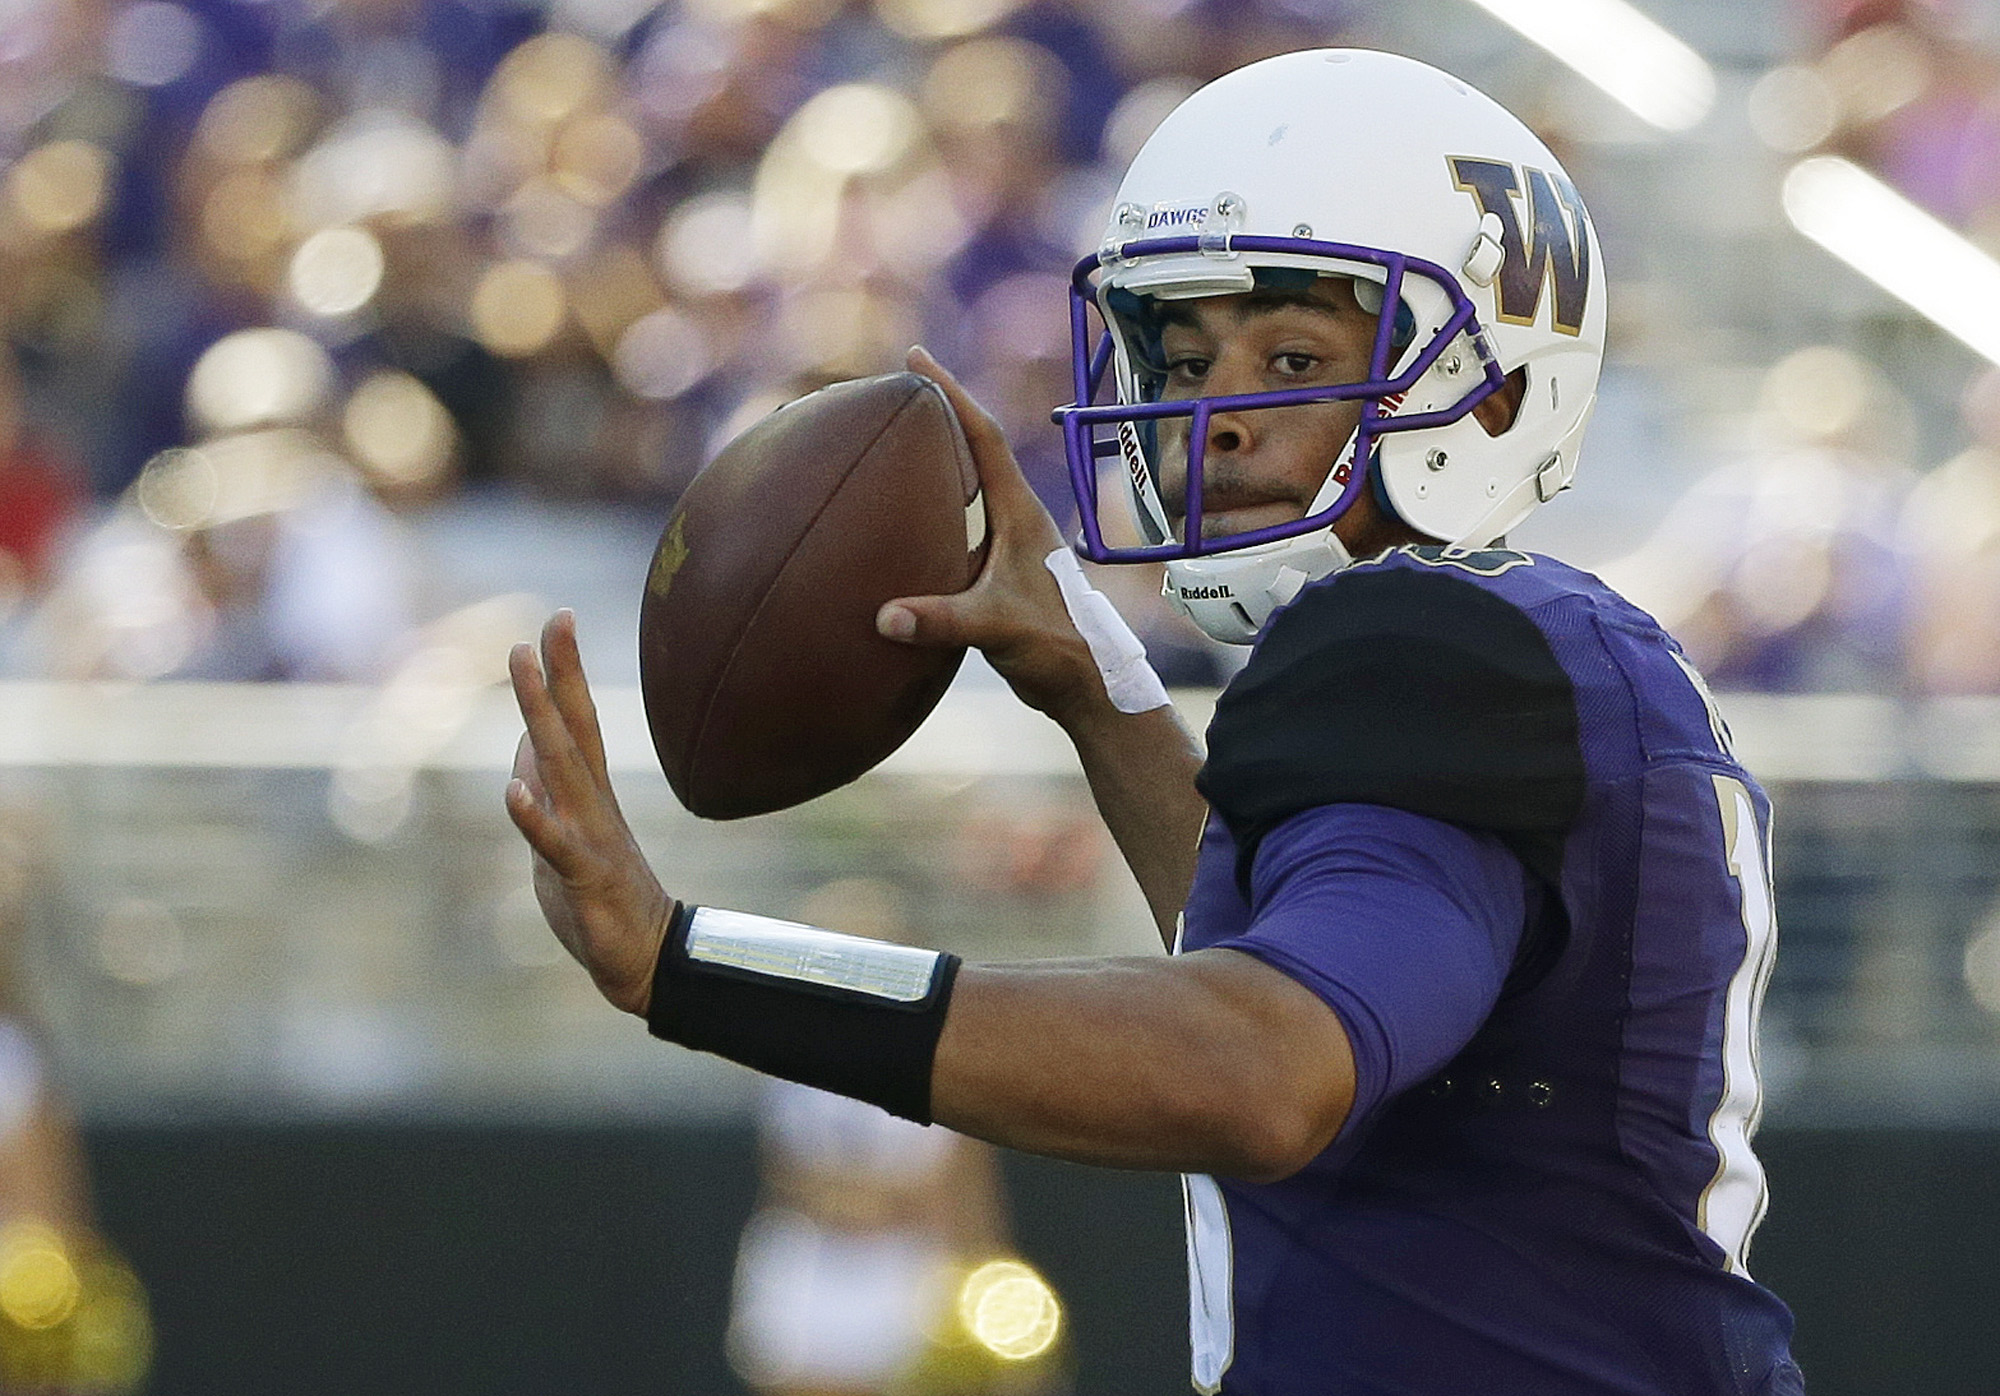 Washington QB Cyler Miles, His Hip Injury Leads Him to Retire From Football